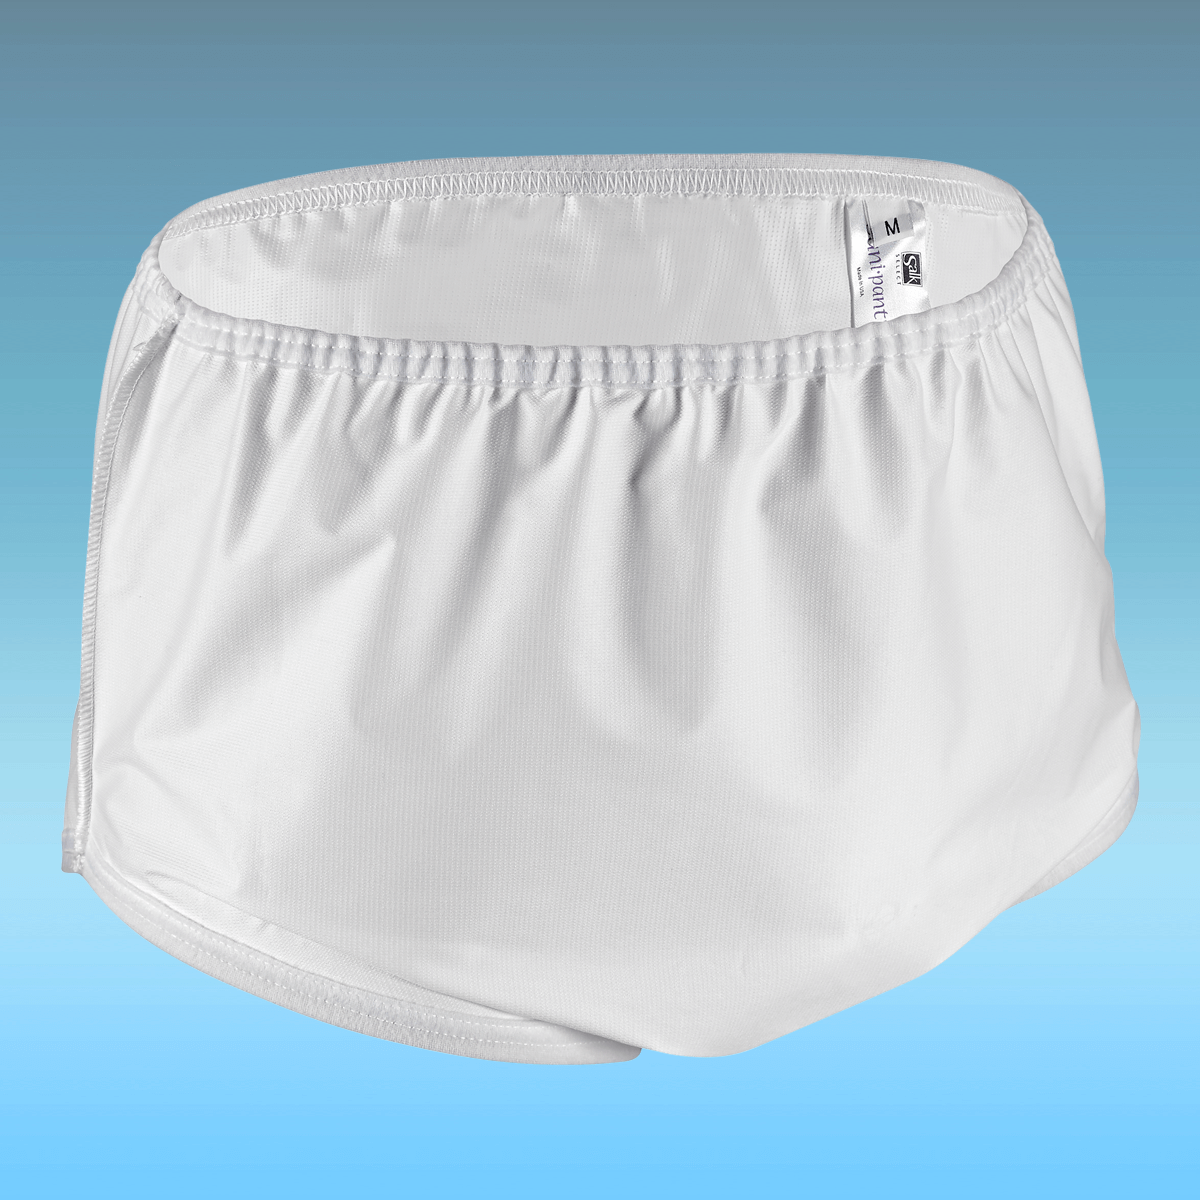  Panitay 8 Pcs Adult Diaper Cover Incontinence